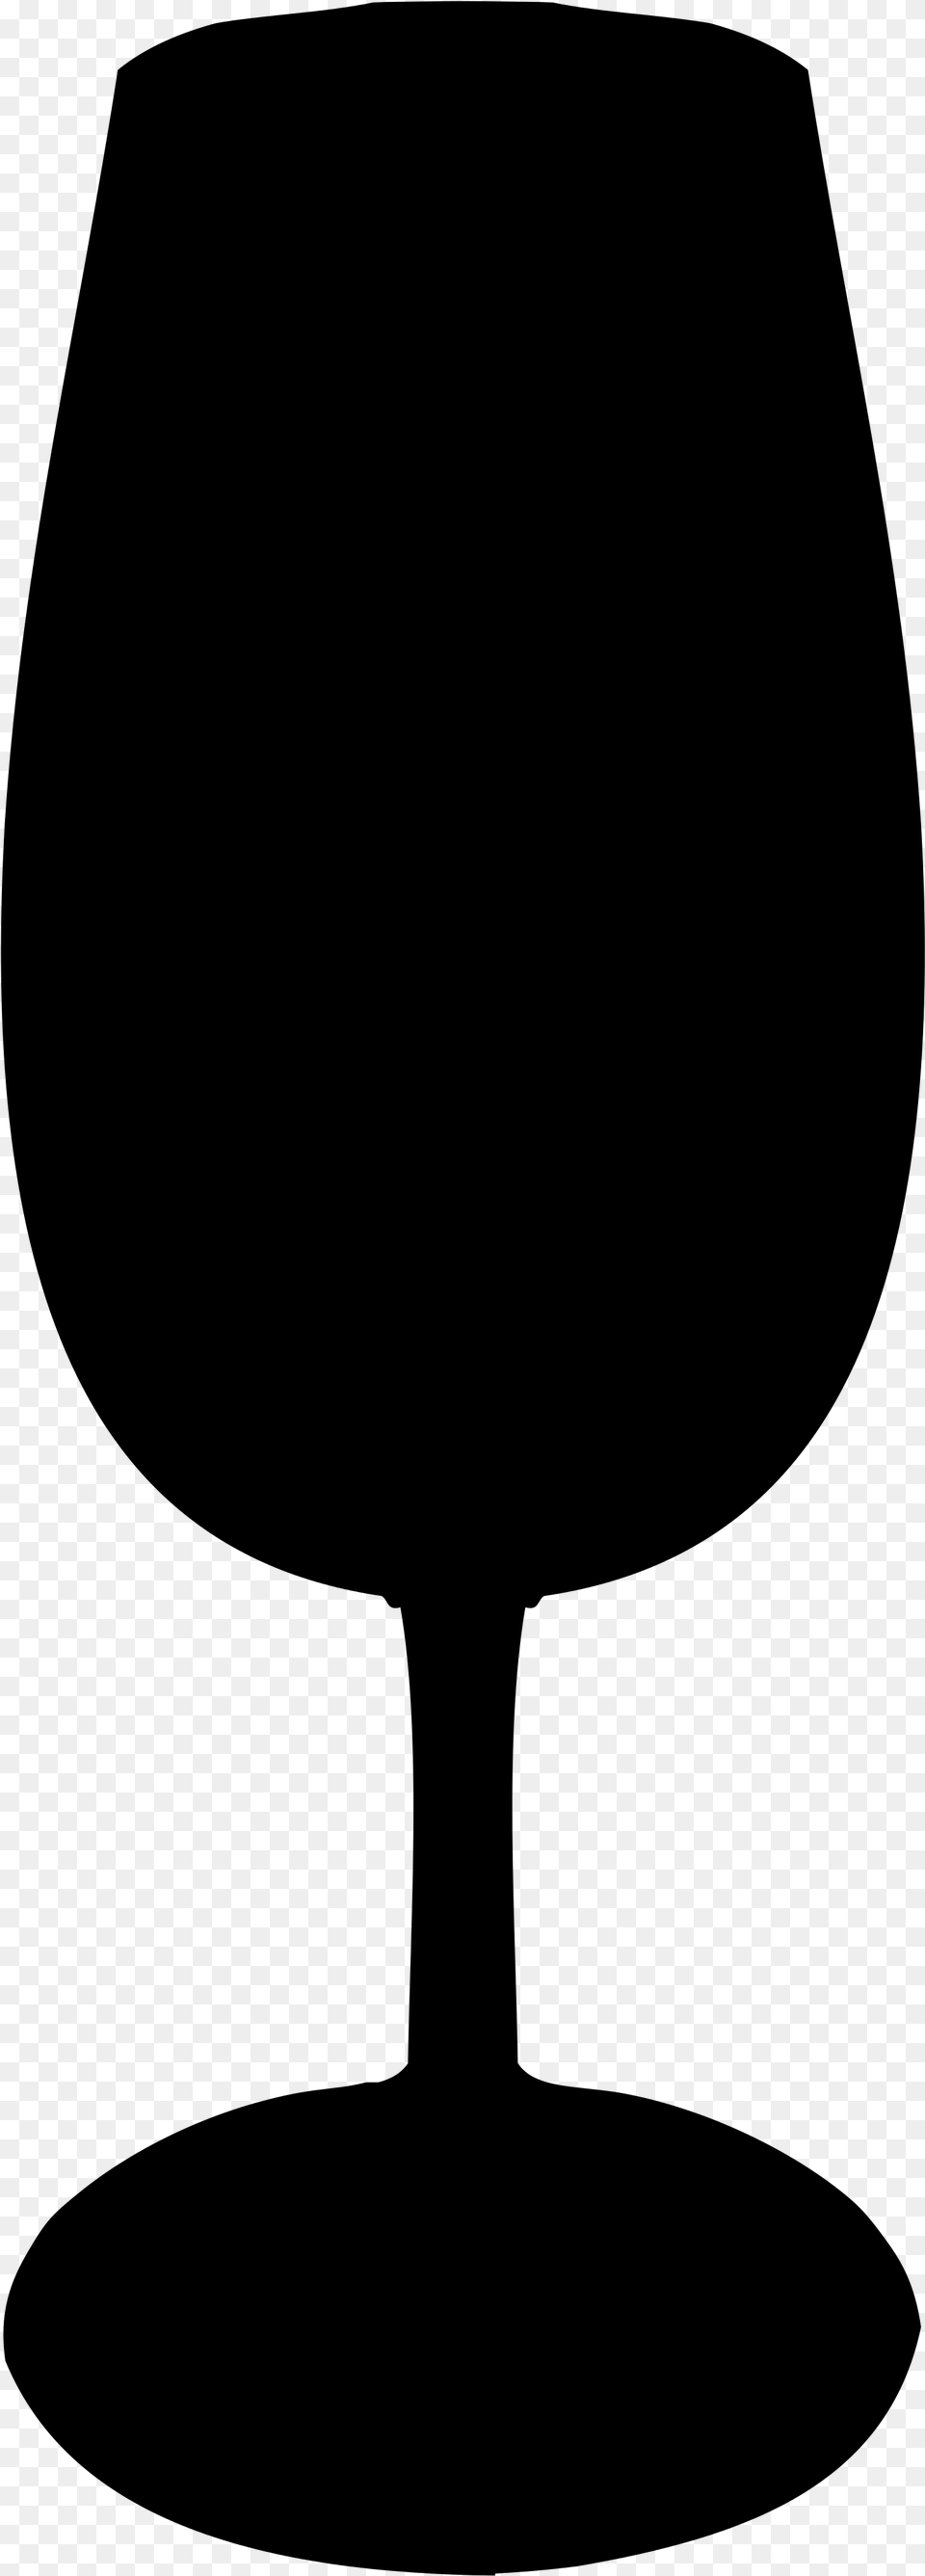 Filesherry Glass Silhouette Wine Glass Black Silhouettes, Gray Free Png